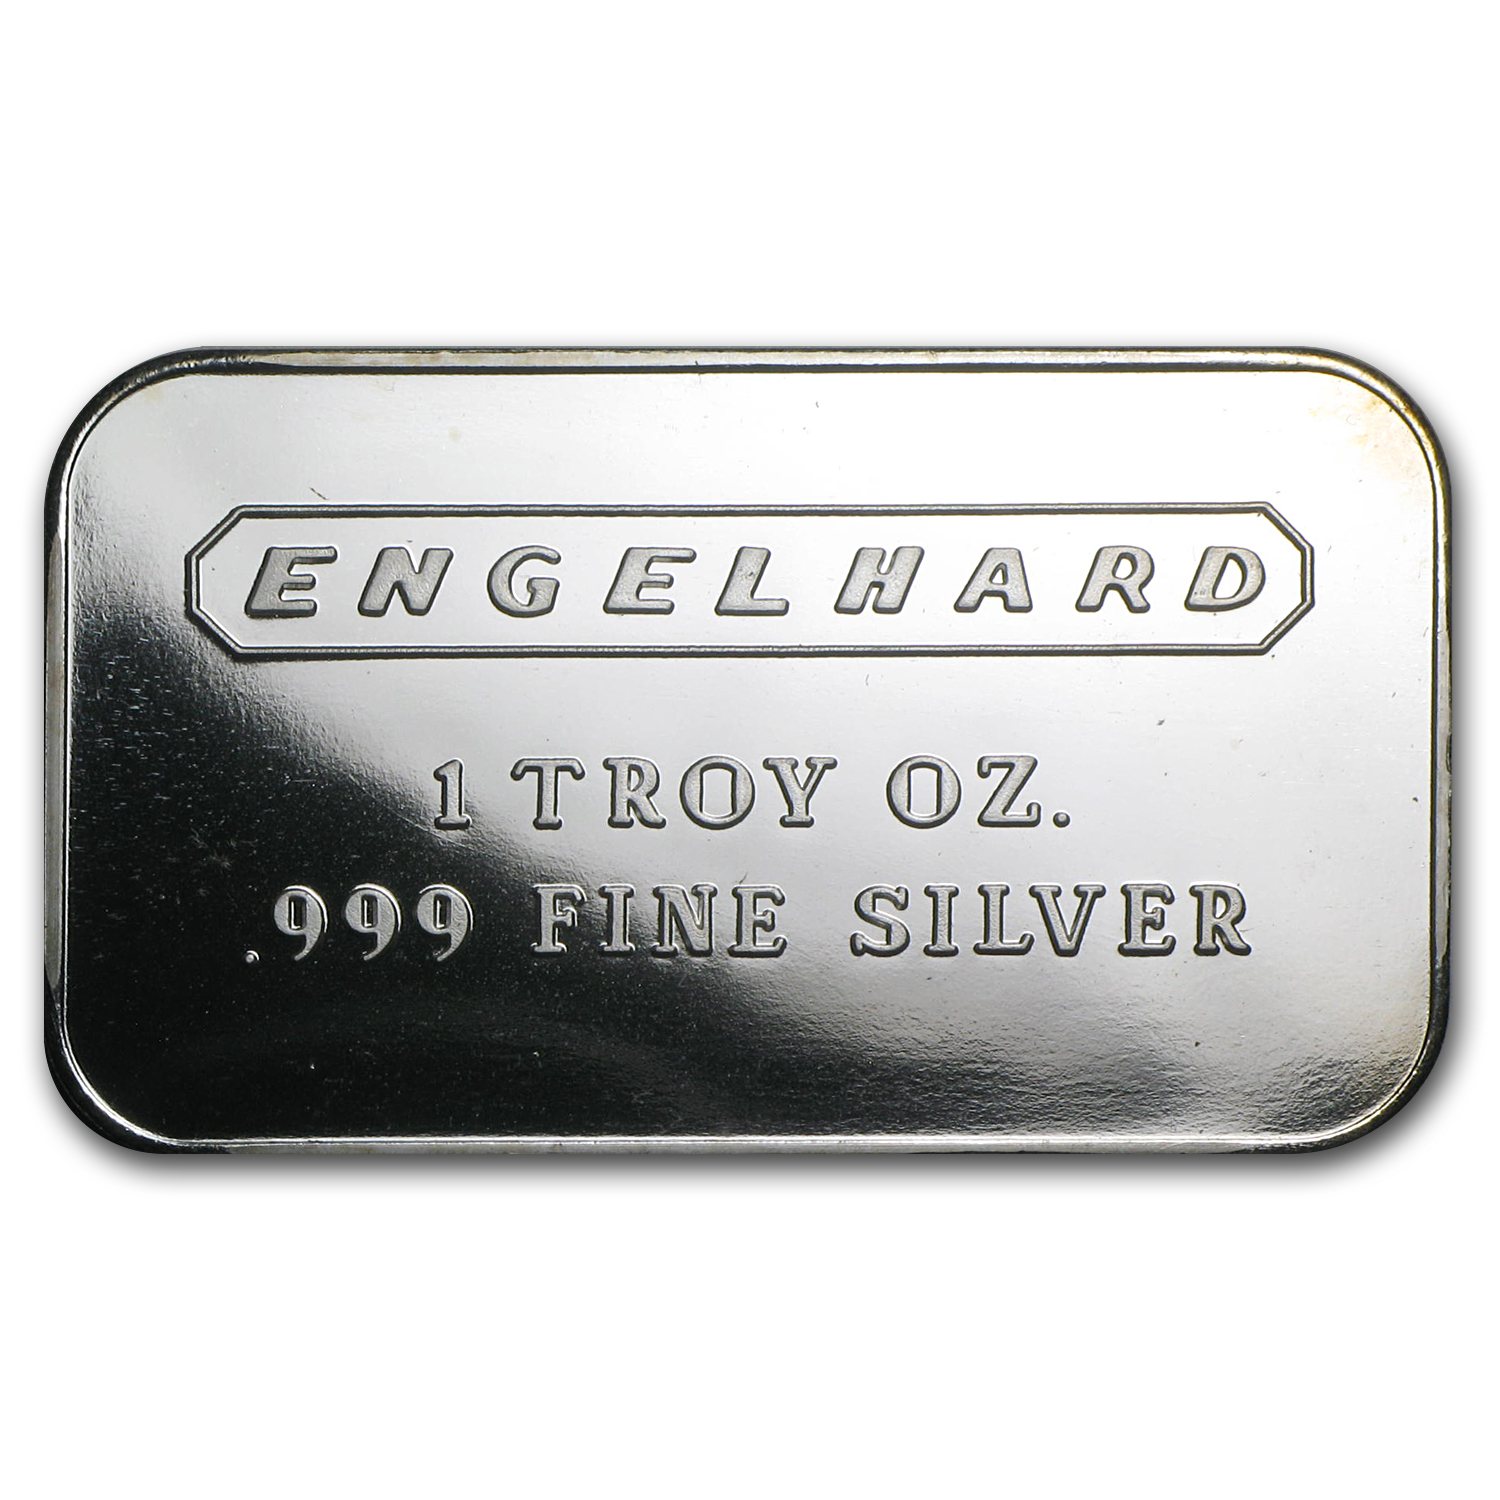 royal canadian mint silver bar serial number lookup